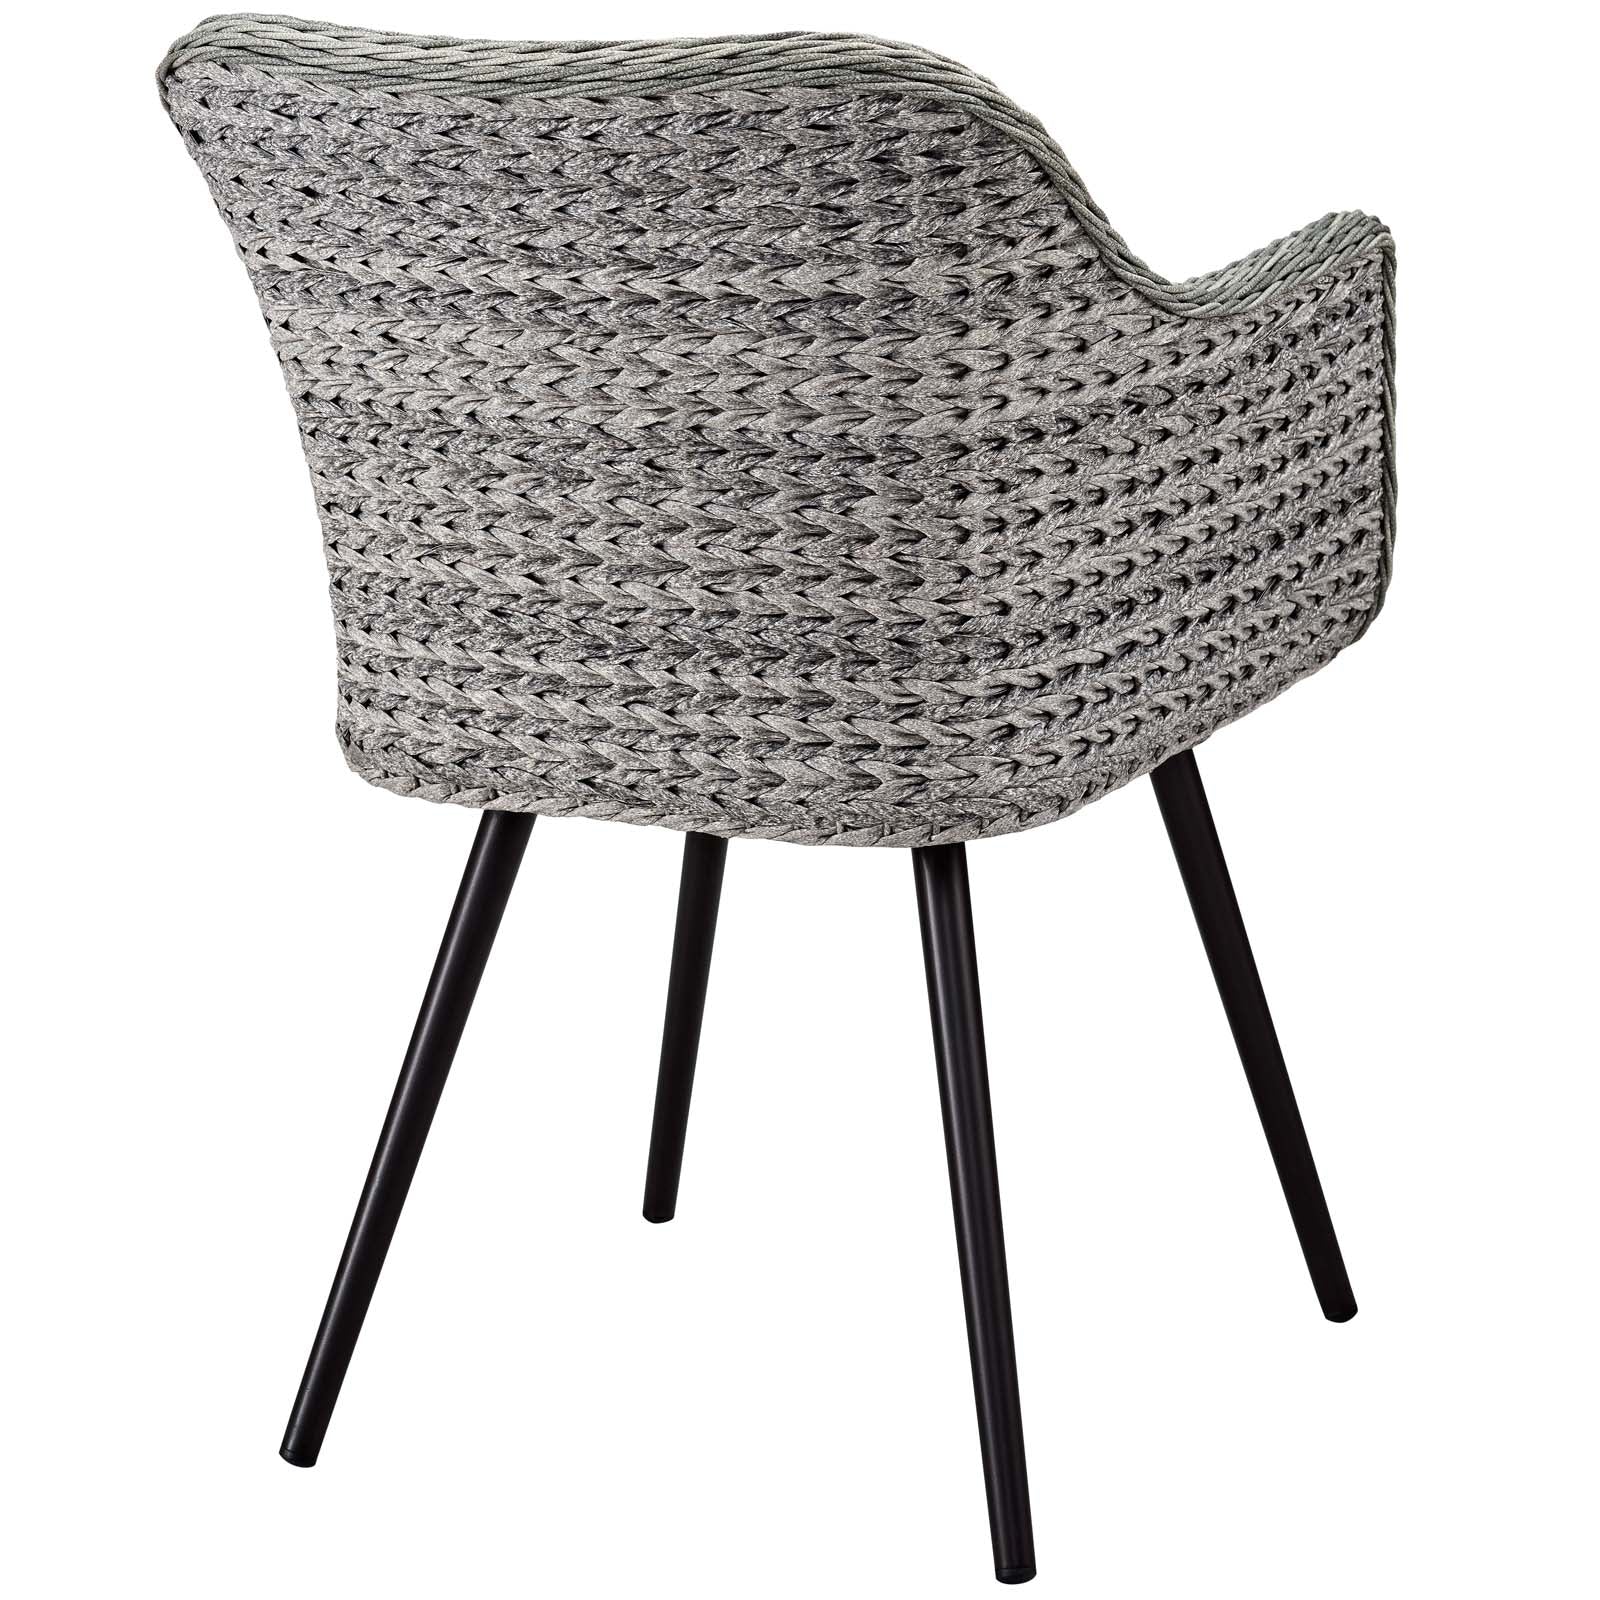 Endeavor Outdoor Patio Wicker Rattan Dining Armchair - East Shore Modern Home Furnishings